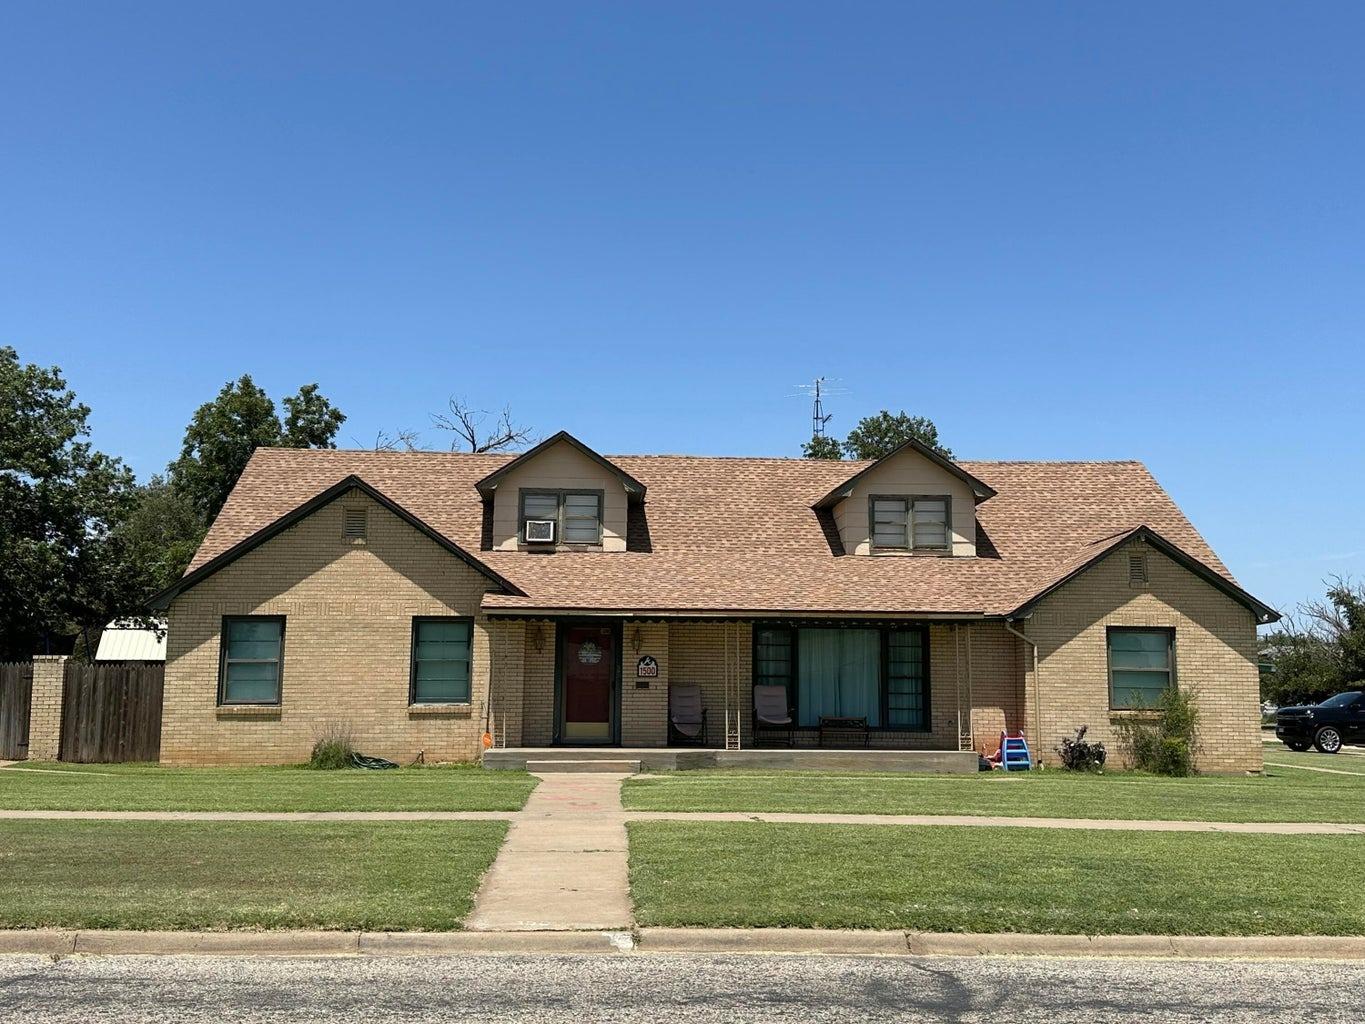 This amazing home has unbelievable space. Offering 4 bedrooms, 3 full baths, 2 living areas, huge sun room and basement. Great backyard with a huge work shop with electricity. This home also has solar panels that will be paid off at closing with a reasonable offer.